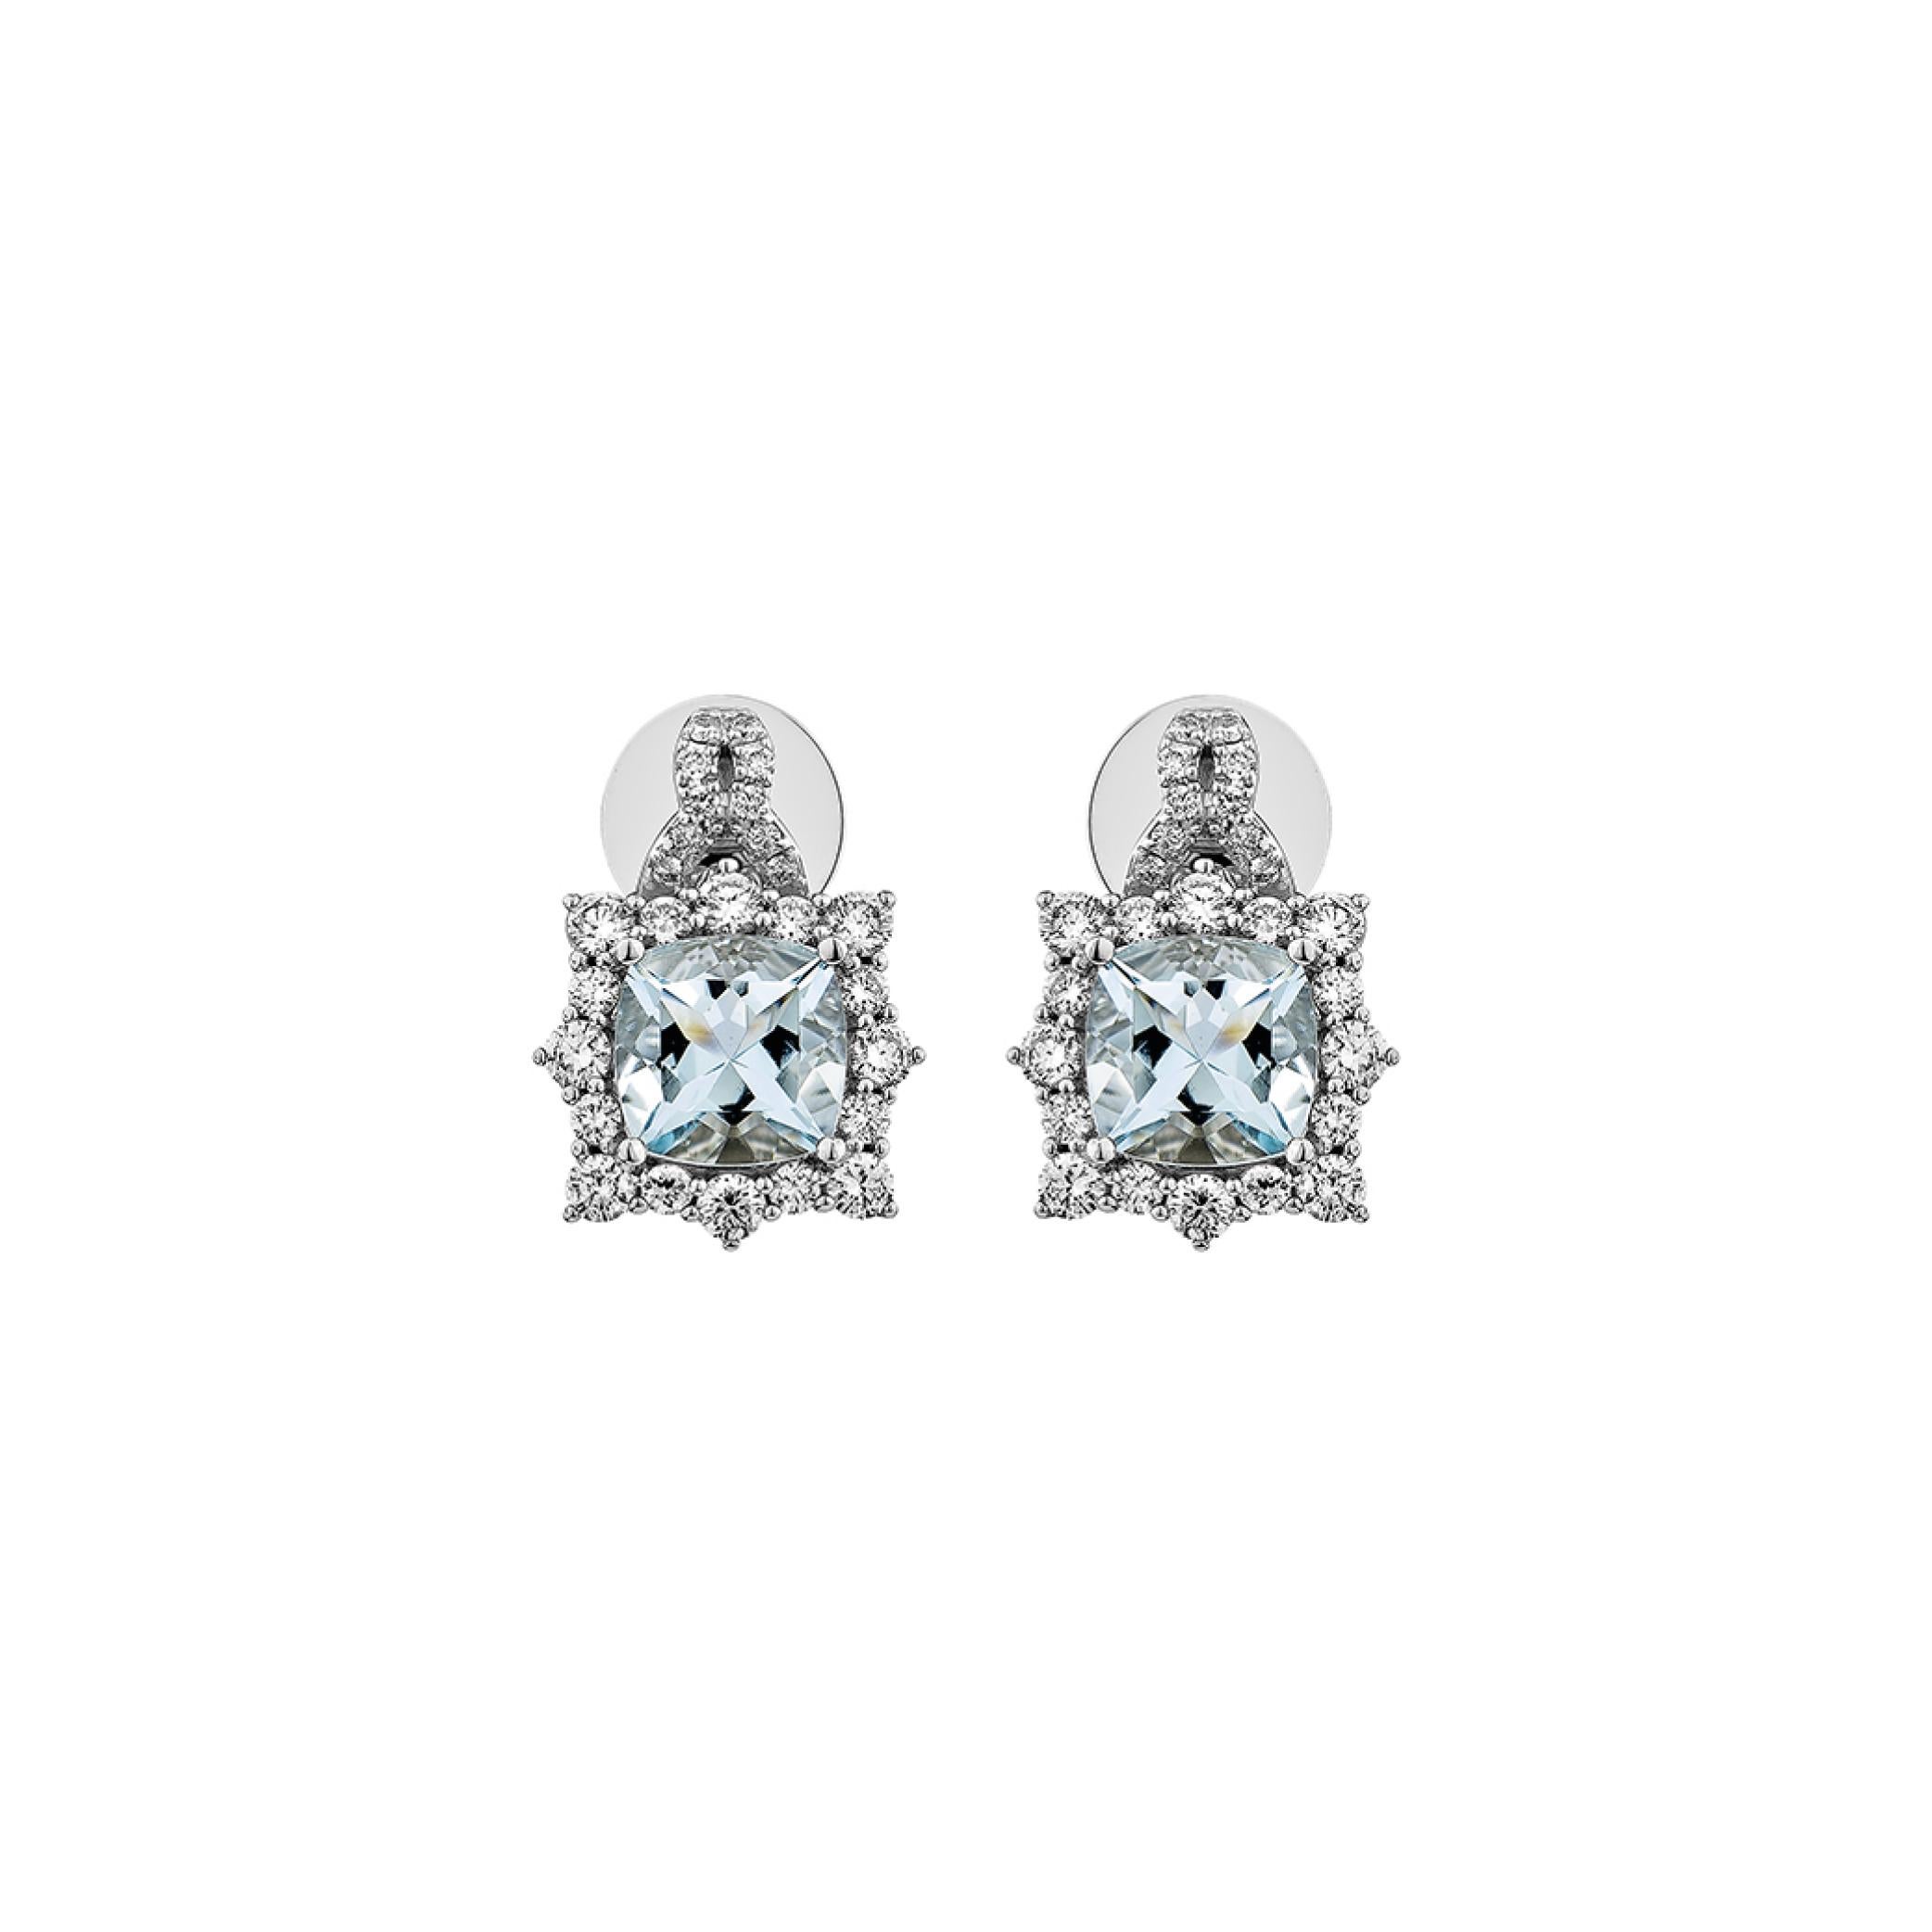 Contemporary 2.39 Carat Aquamarine Stud Earrings in 18Karat White Gold with White Diamond. For Sale